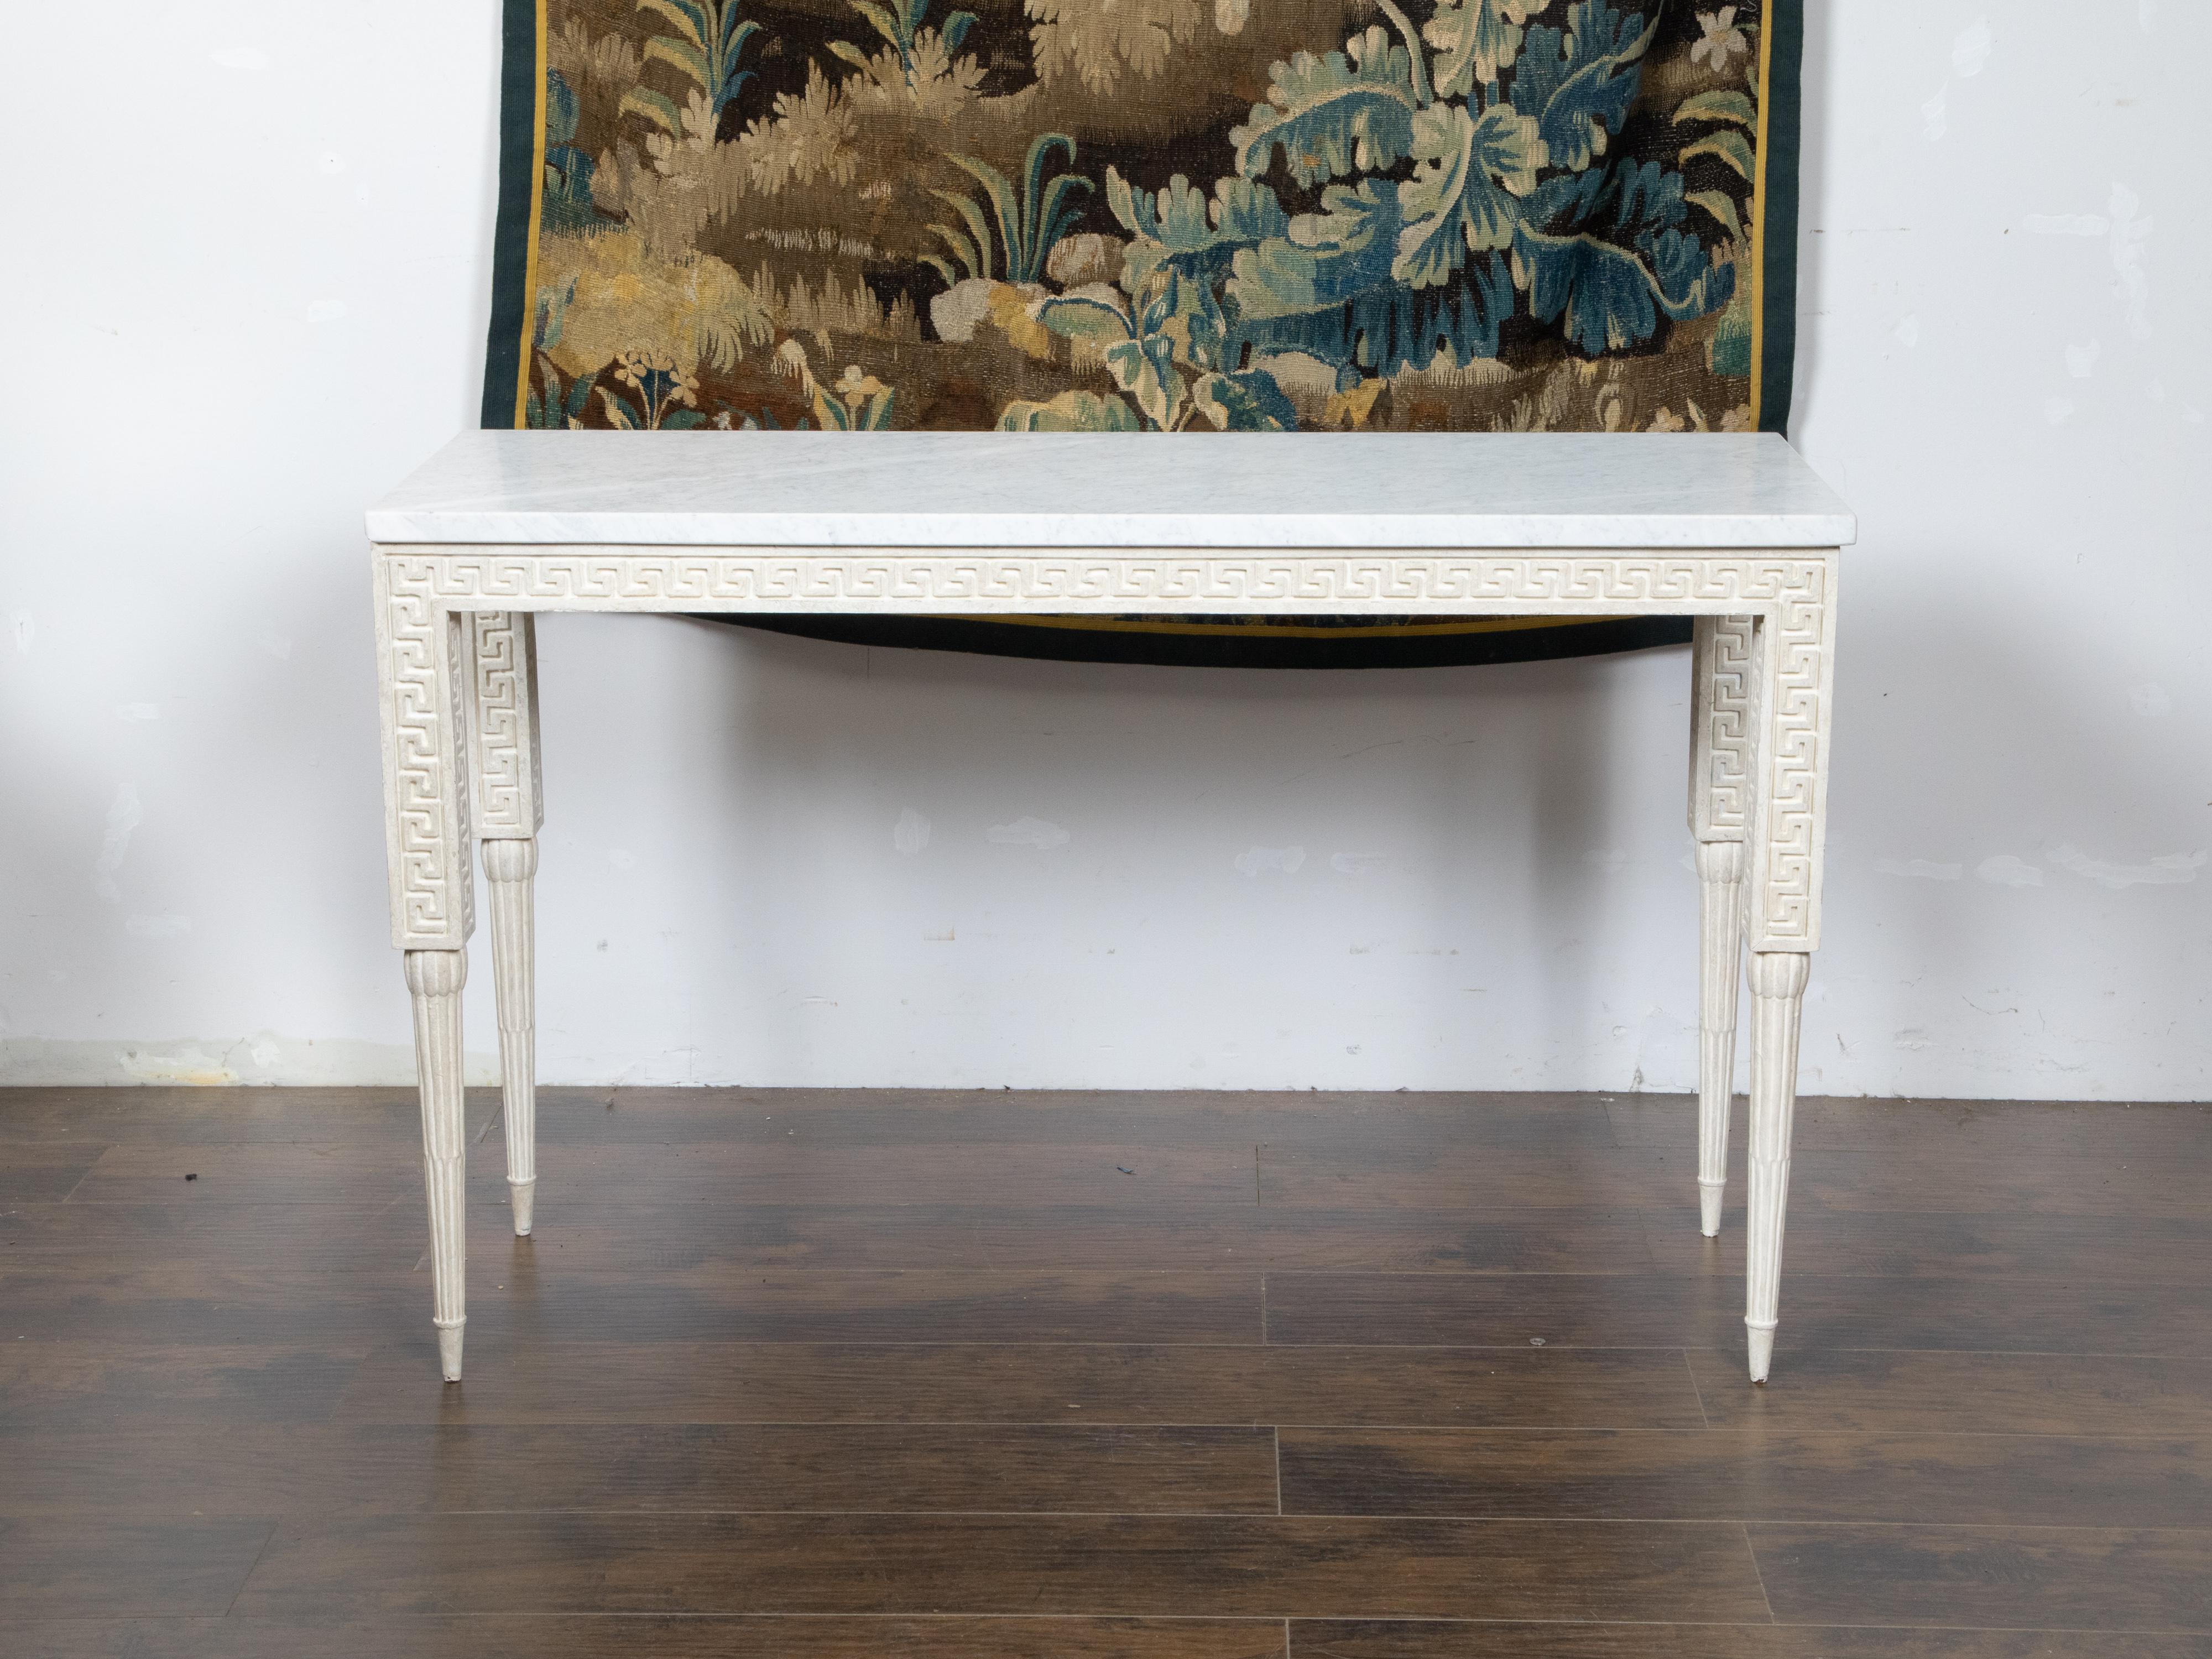 An Italian painted wood console table from the Mid-20th Century, with white marble top, carved Greek Key frieze and reeded tapering legs. Created in Italy during the midcentury period, this unusual console table features a rectangular white veined